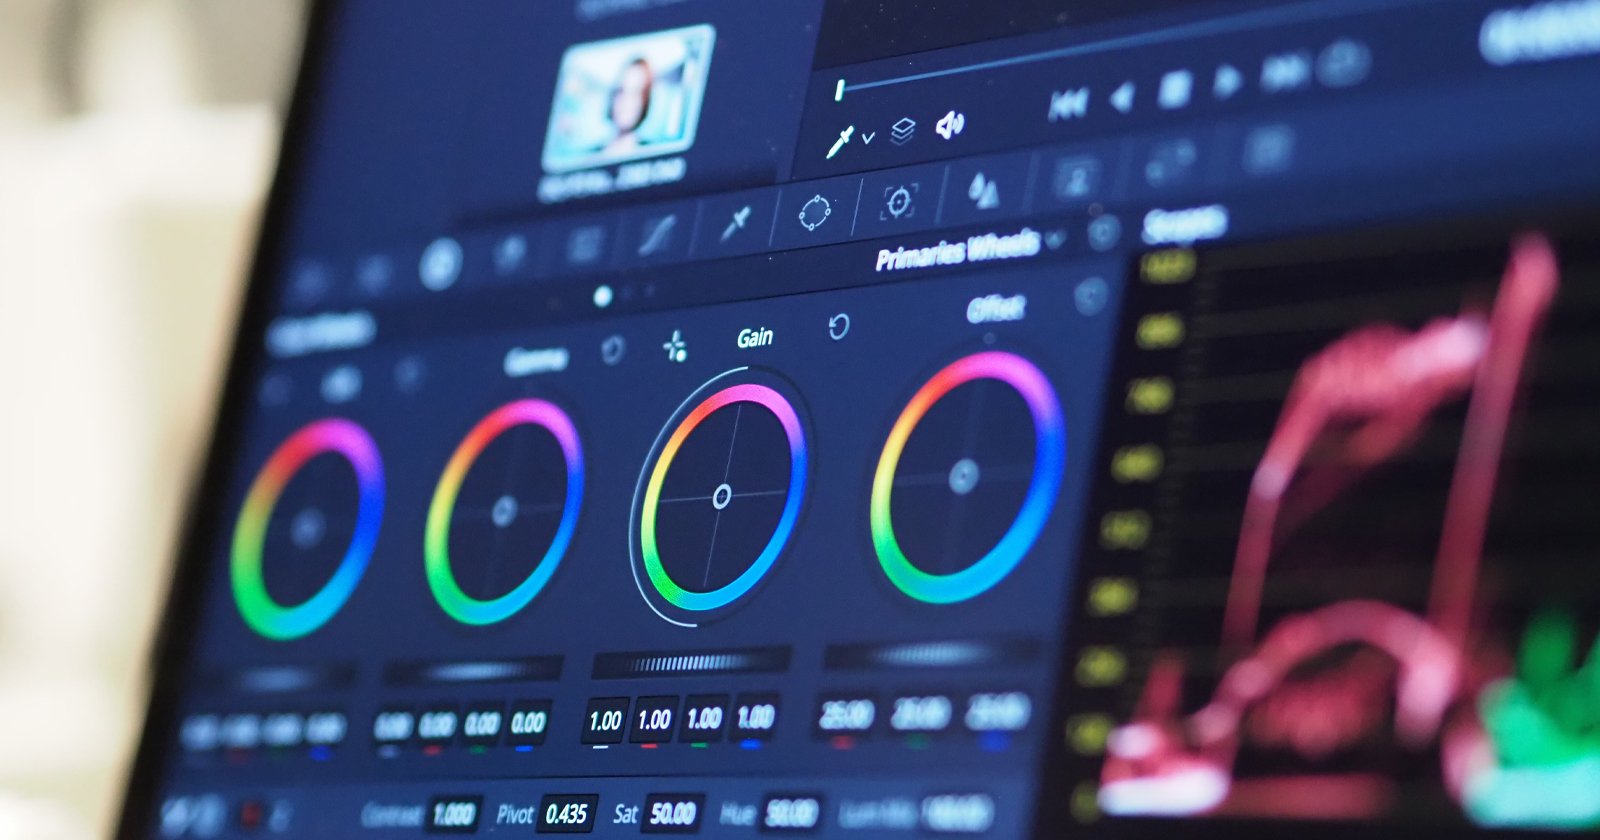 How to Color Grade Video